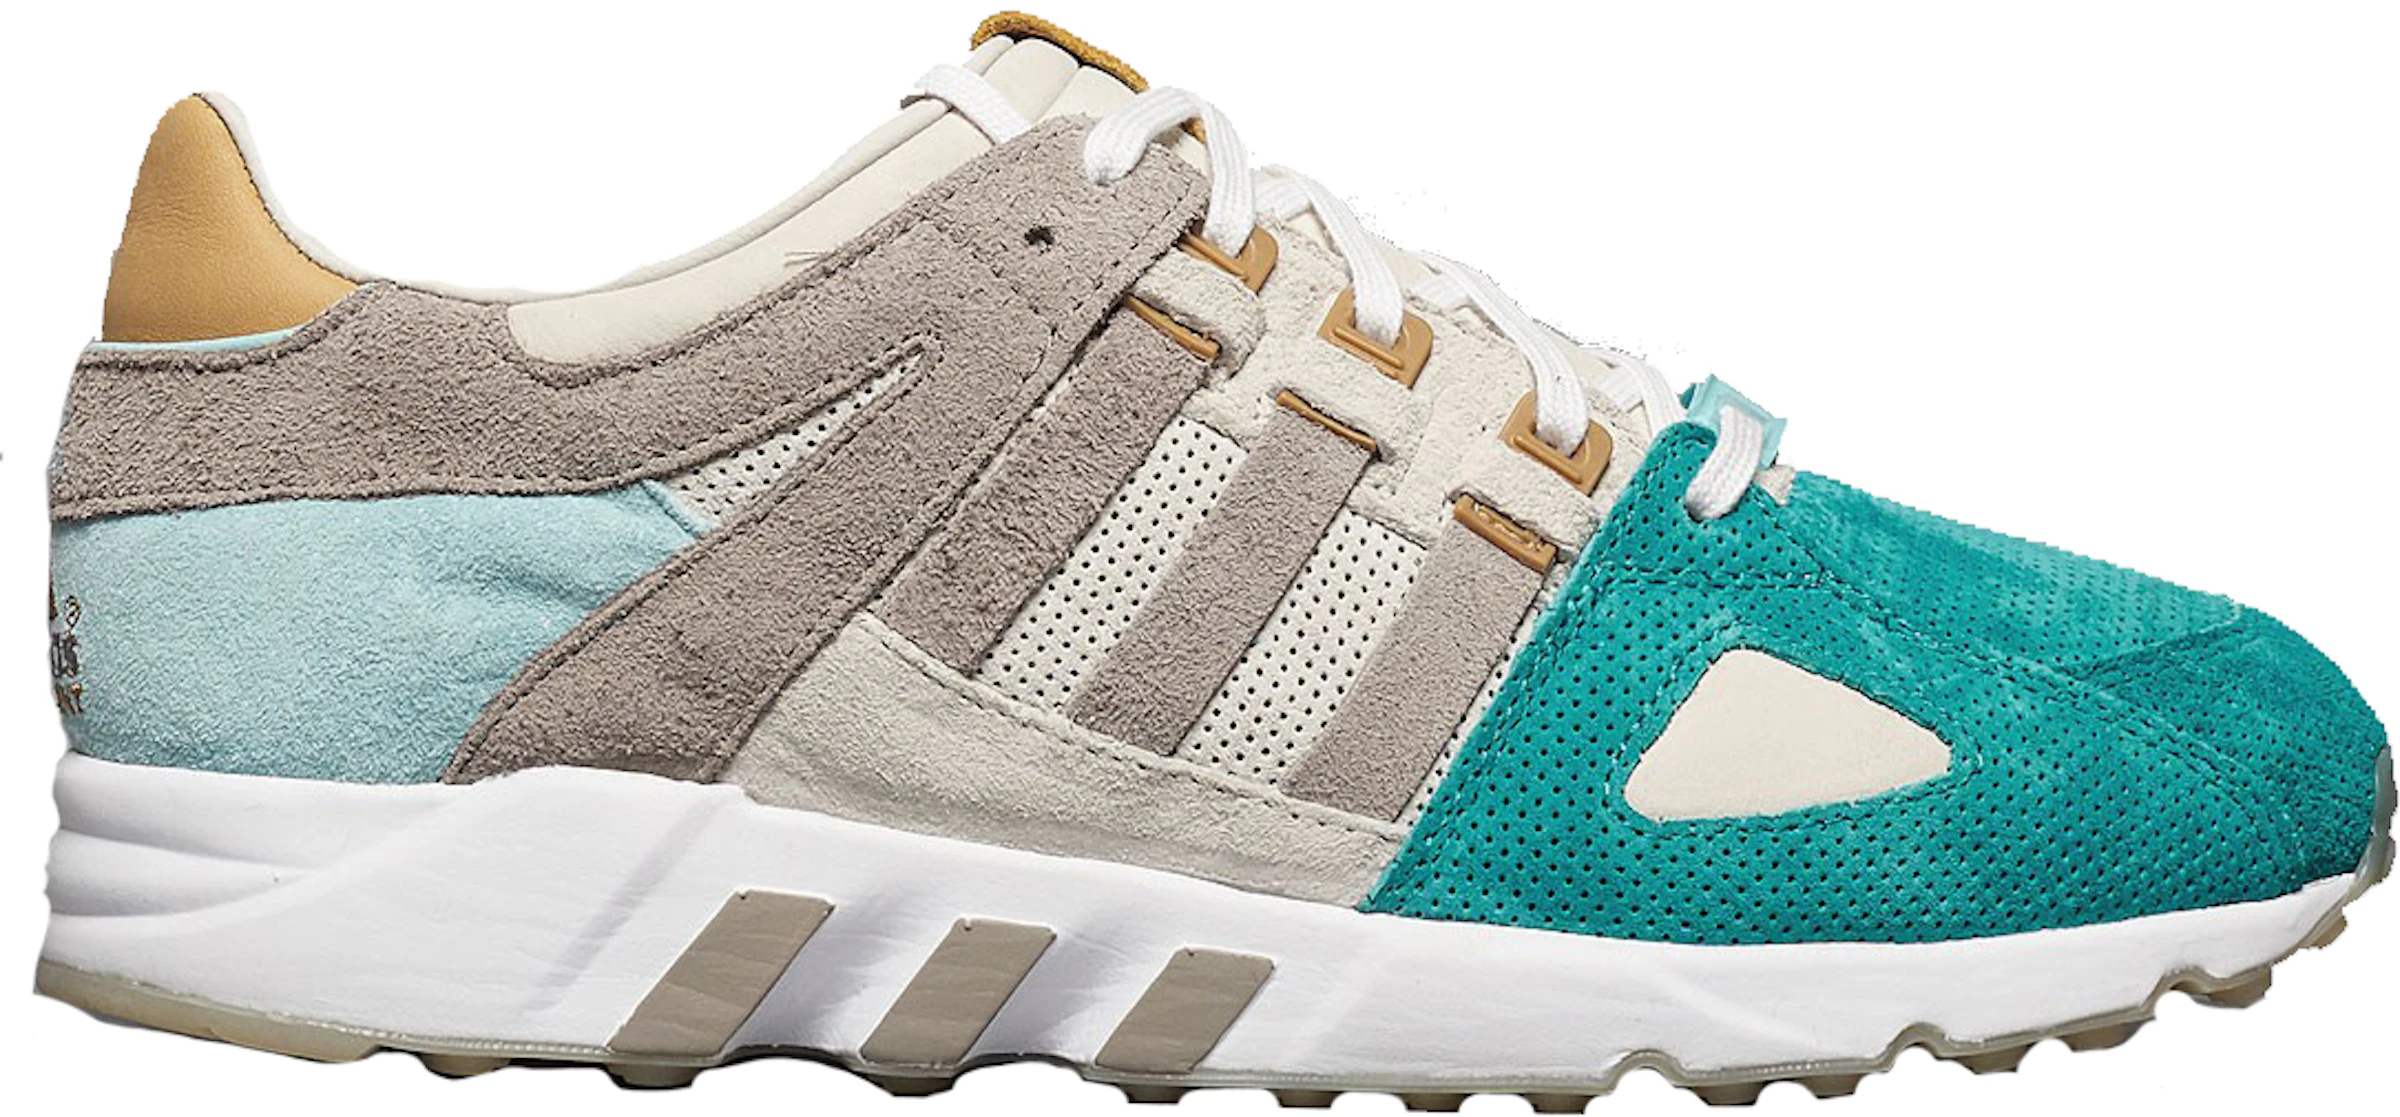 adidas EQT Guidance 93 Sneakers76 - - US